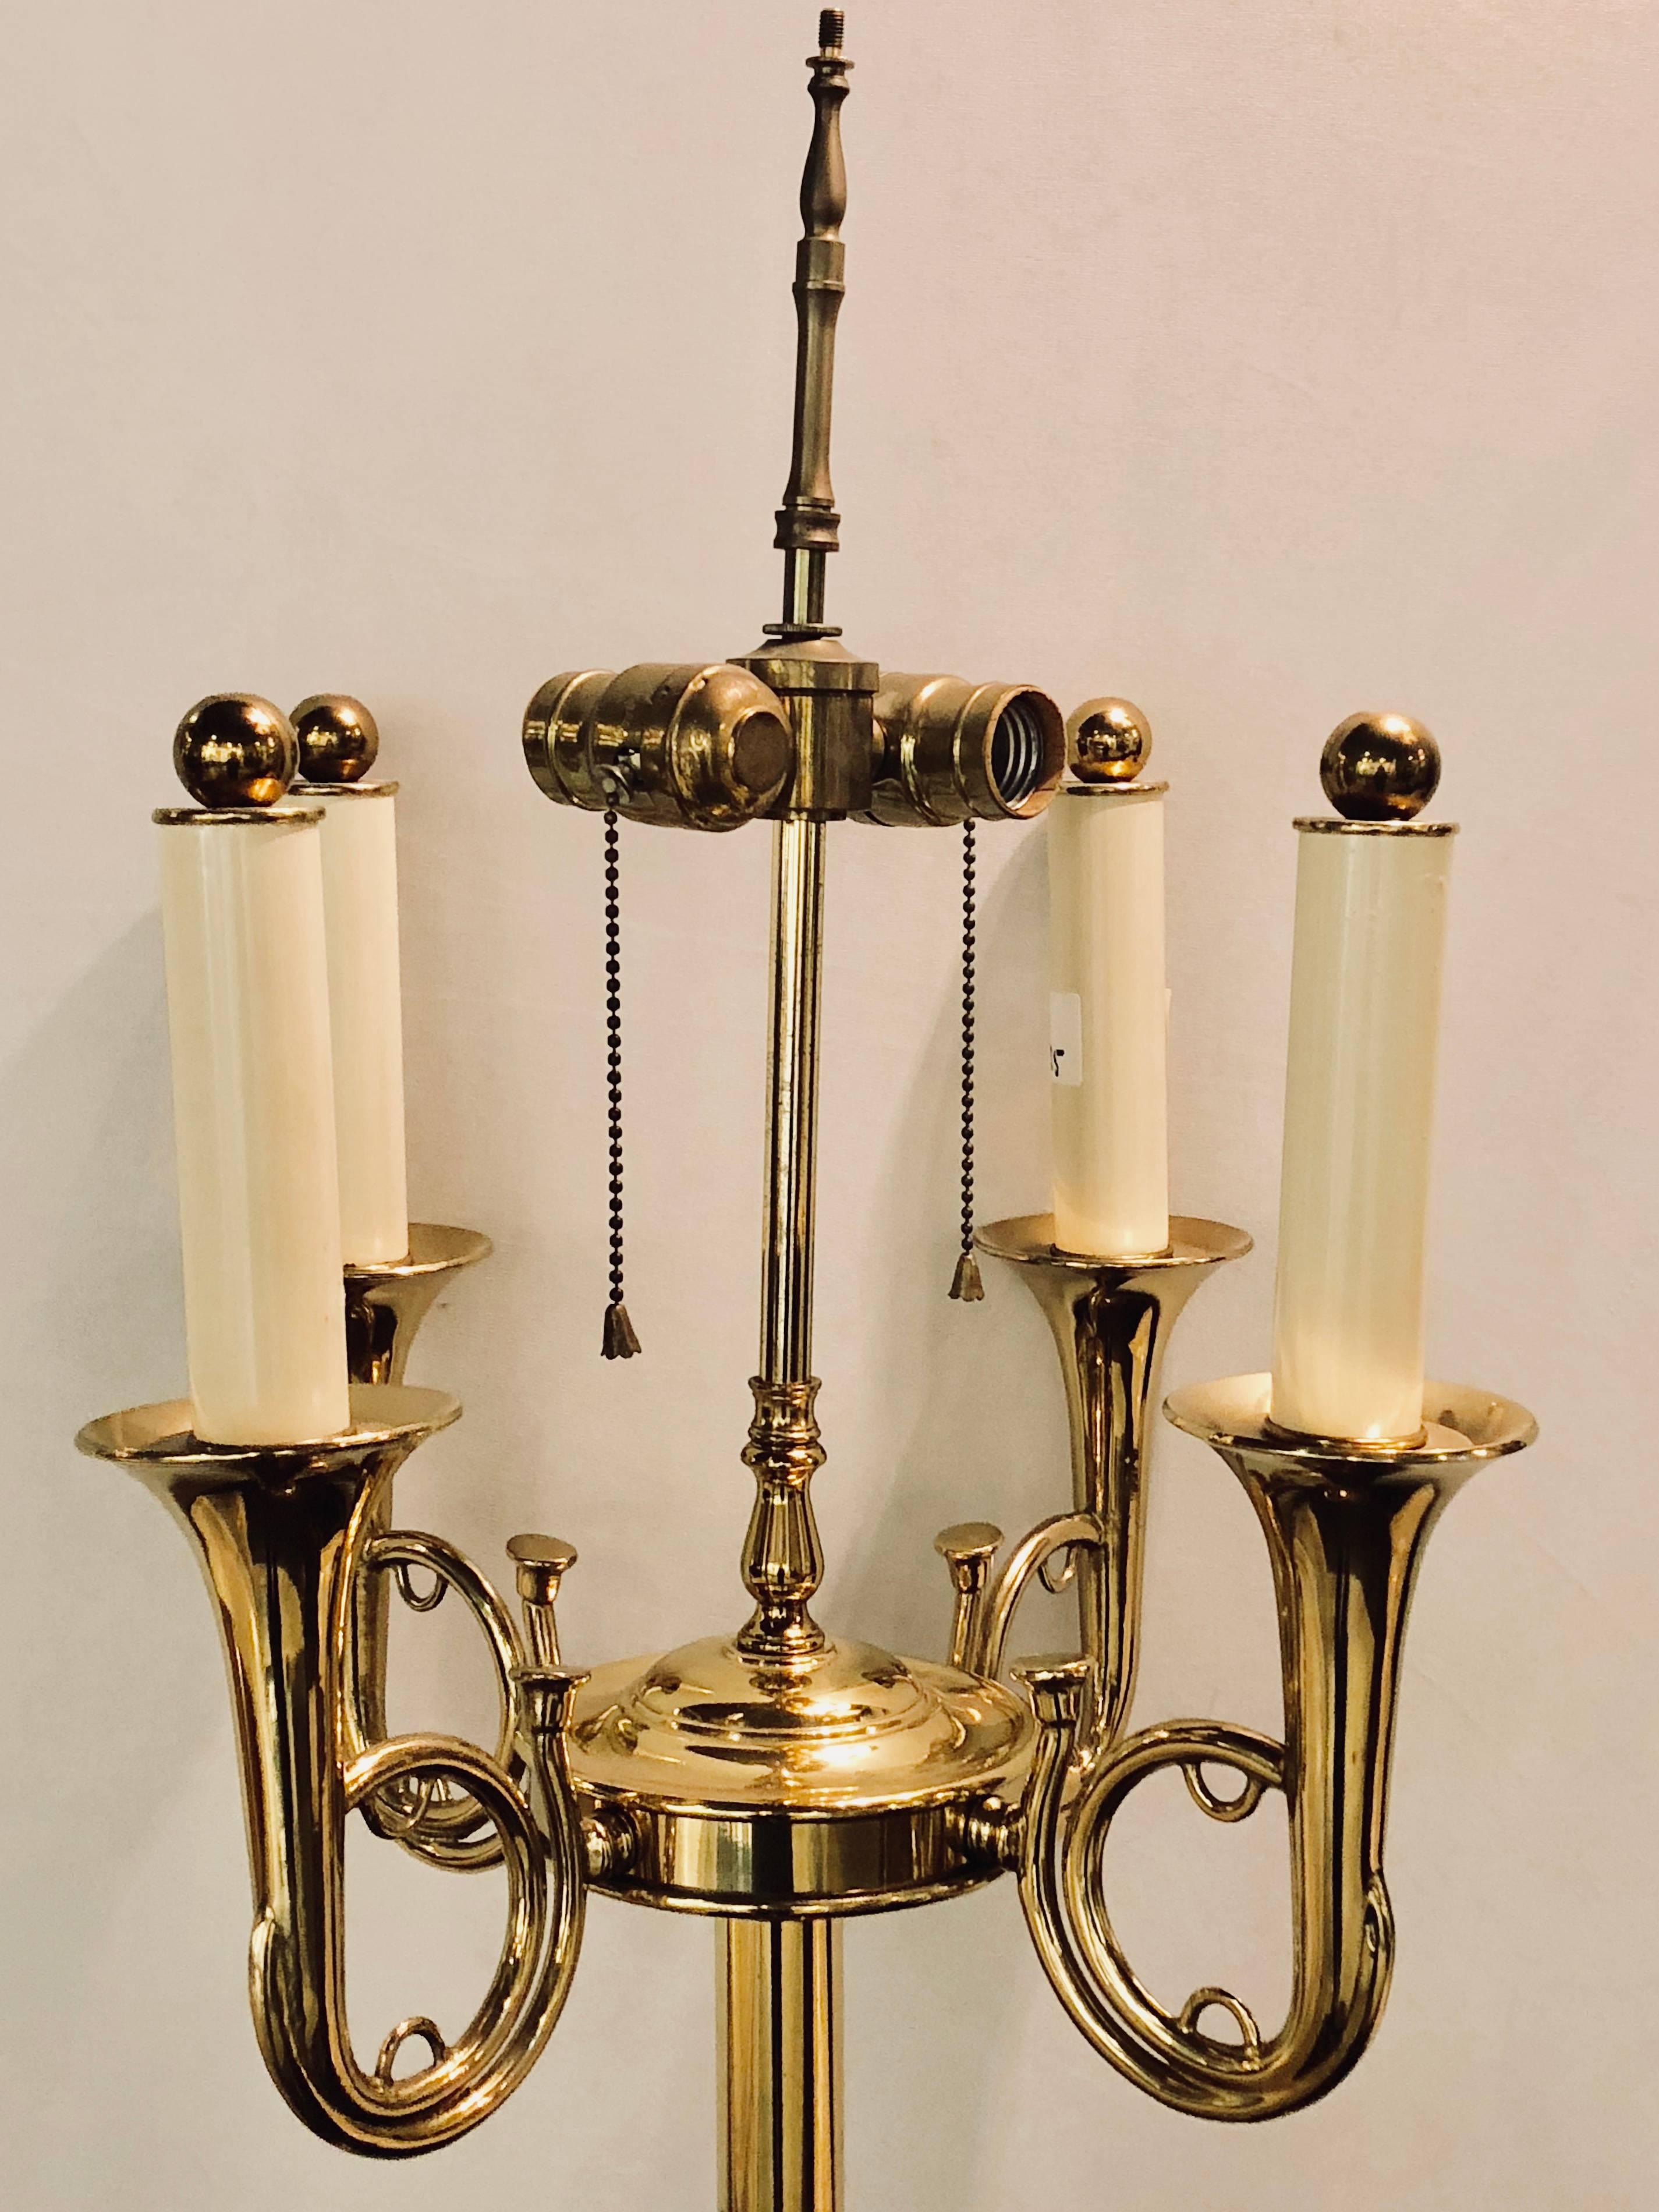 A brass Hollywood Regency Tommi Parzinger style trumpet form floor lamp. The height of lamp is measured from top of ball to the base. This standing lamp comes without a shade and is solid brass.